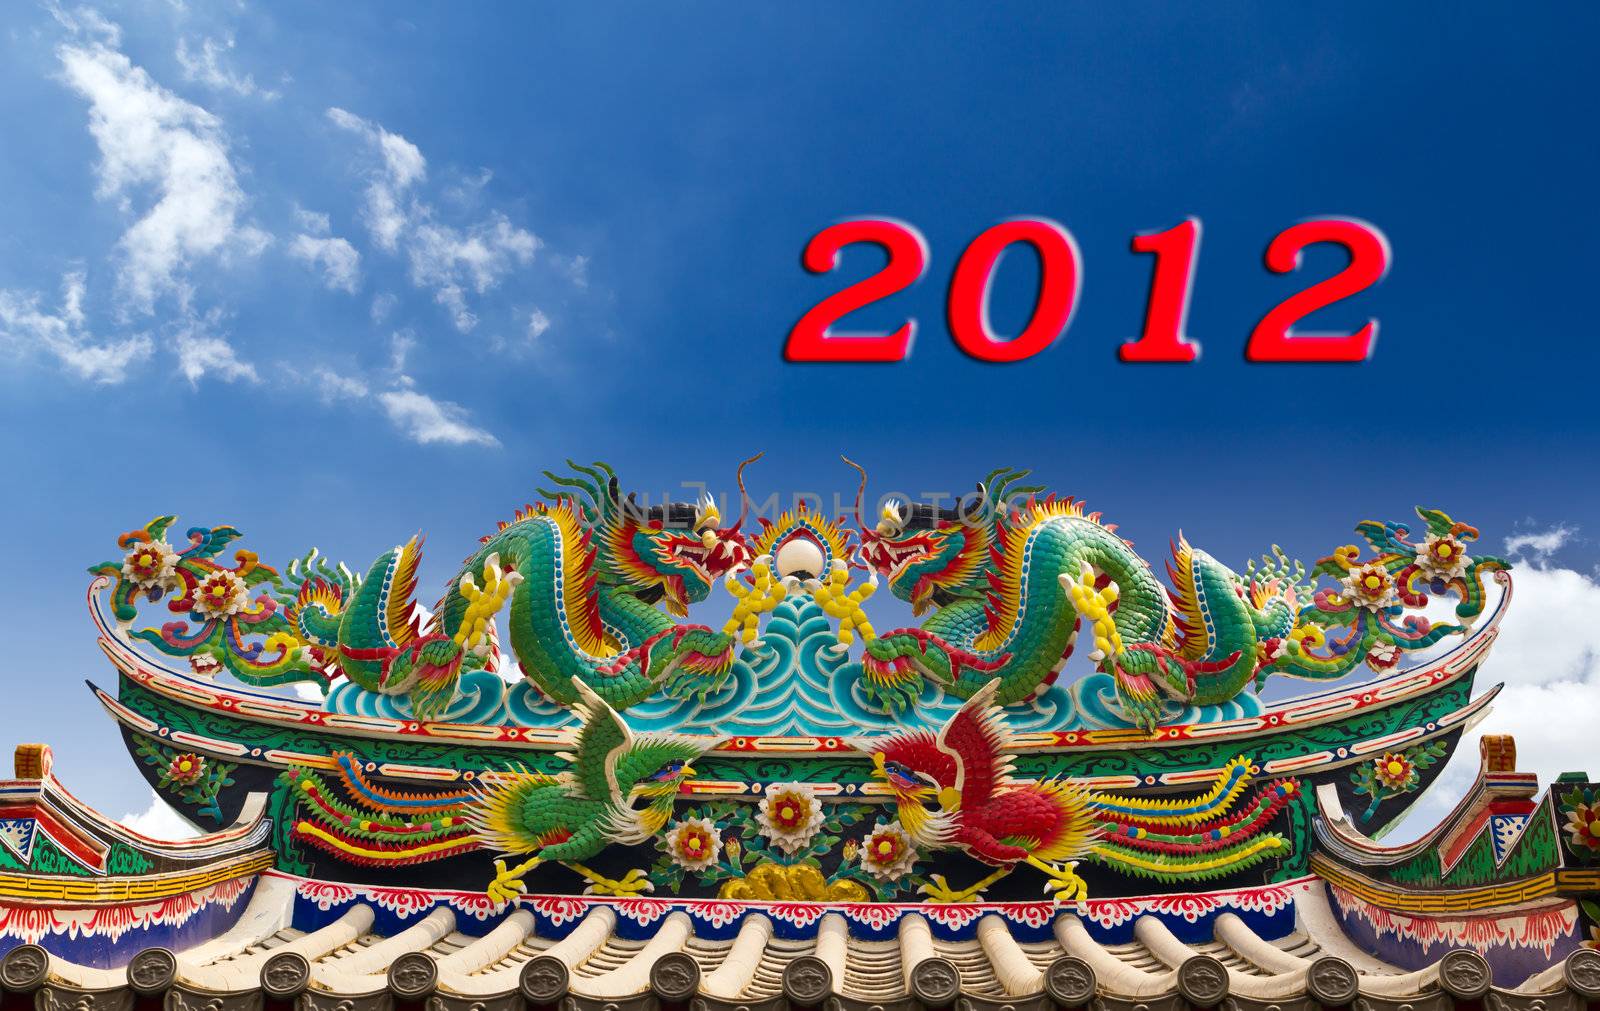 Twin dragon statue and happy new year 2012 by tungphoto